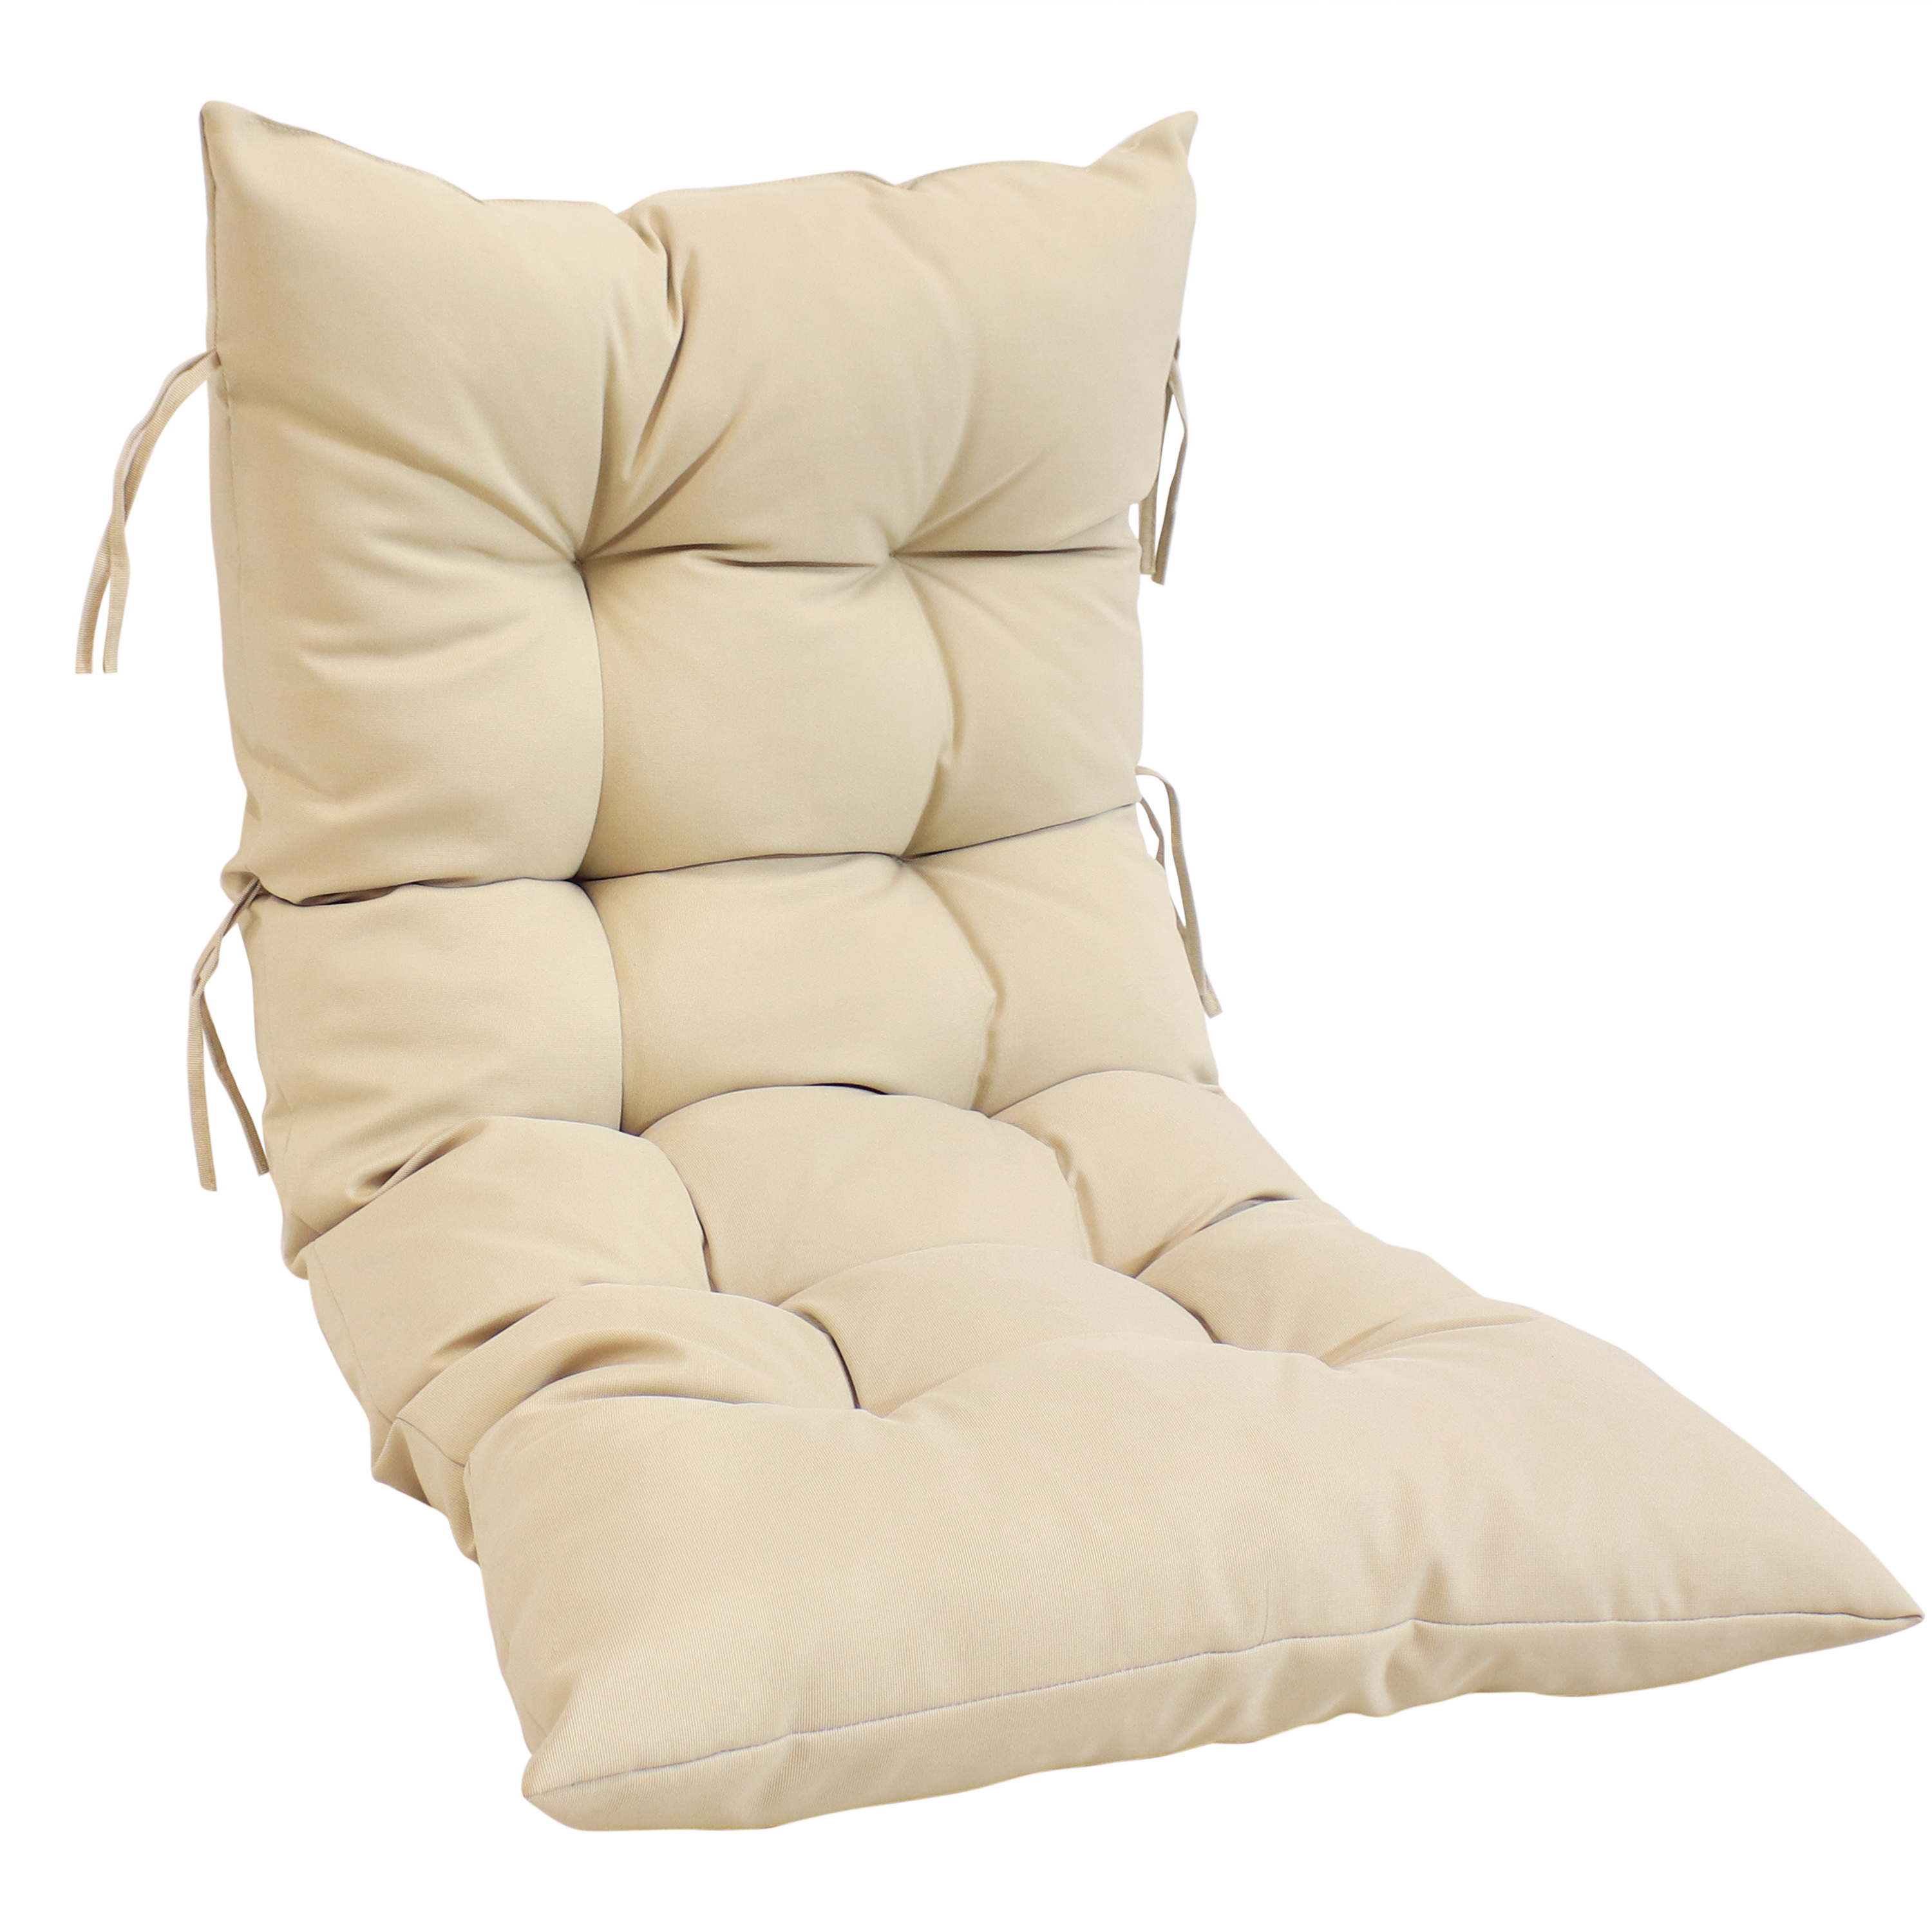 Basket Chair Replacement Cushion - Beige